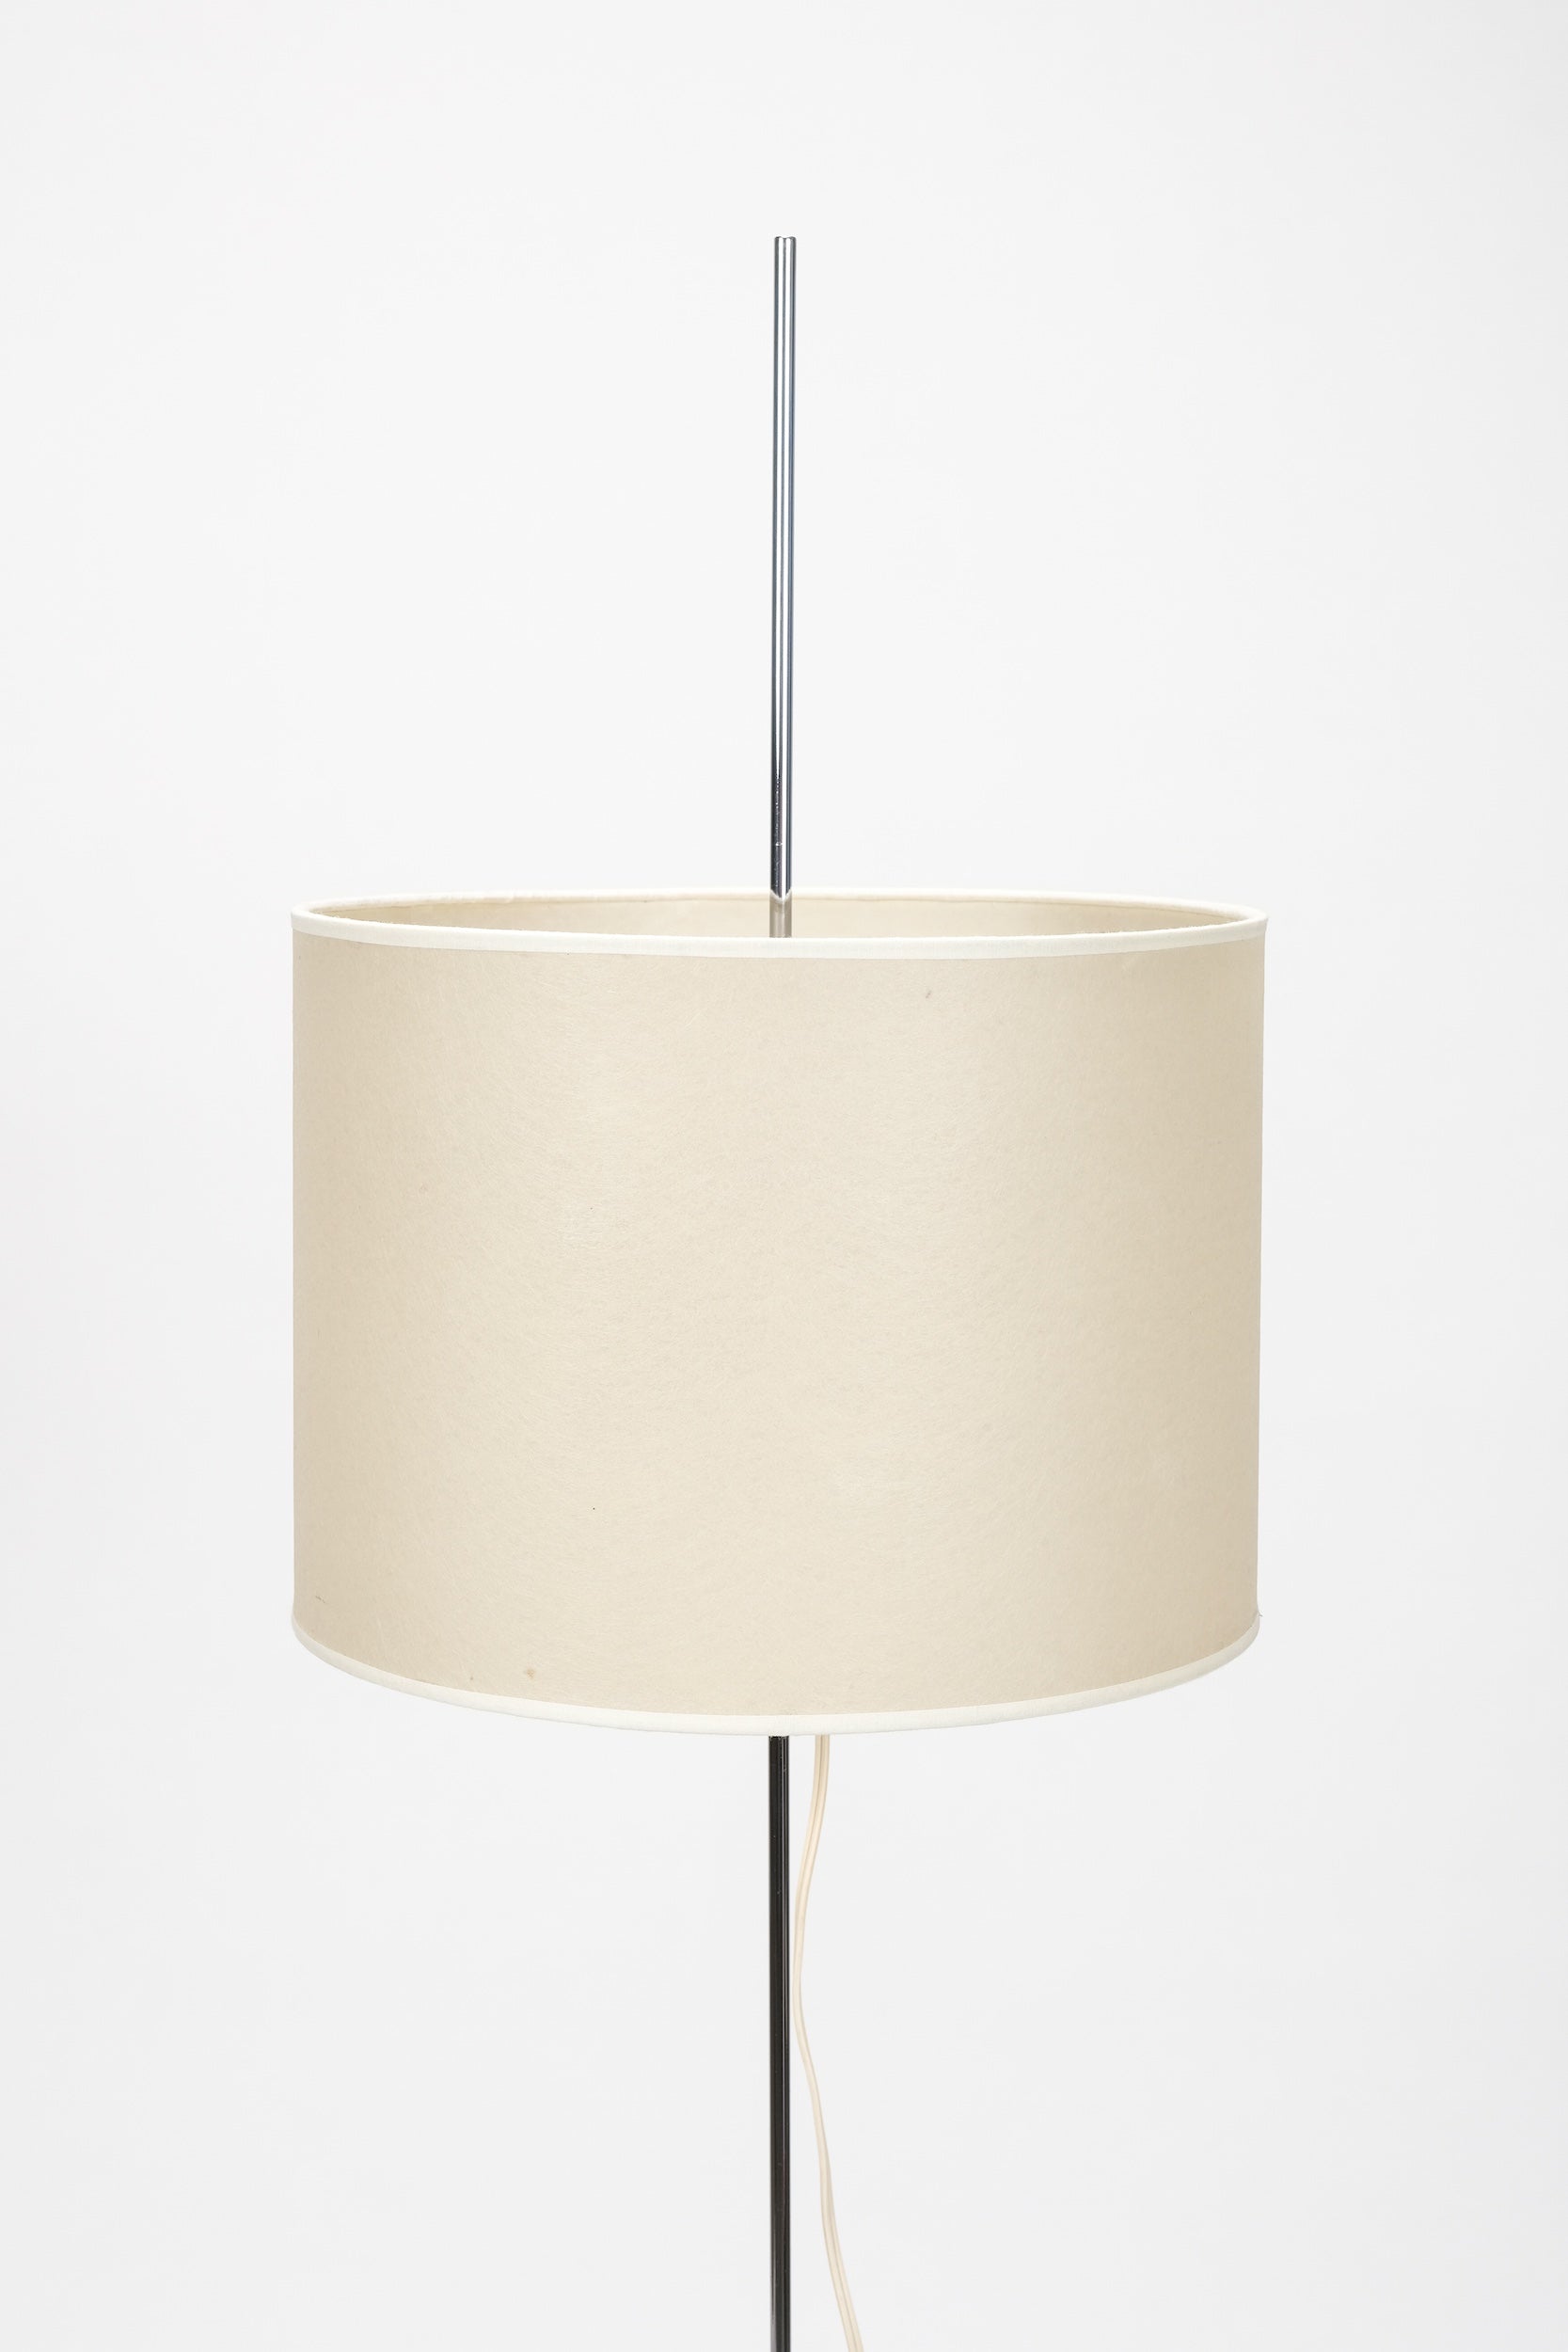 Floor Lamp with height adjustable Shade, Ruser and Kuntner, 60s